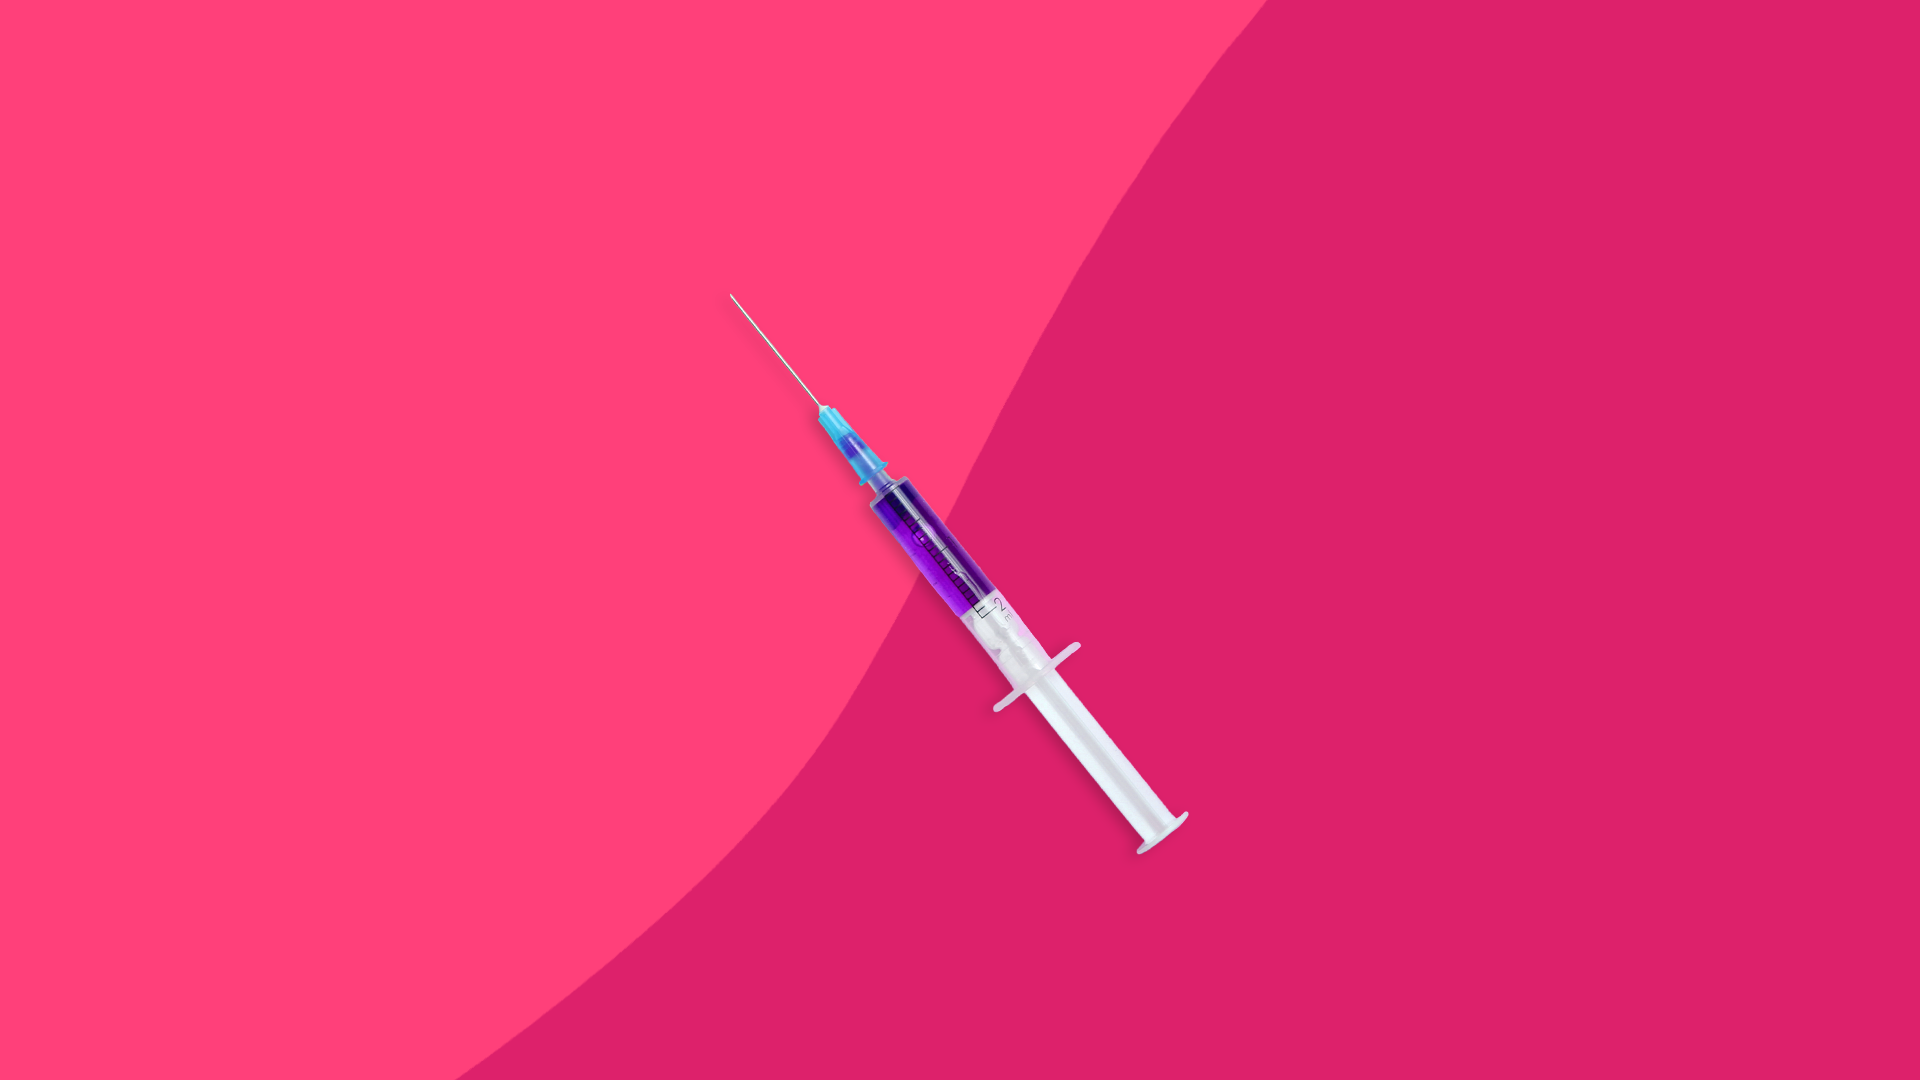 Syringe full of injectable medicine: What are the side effects of Saxenda?